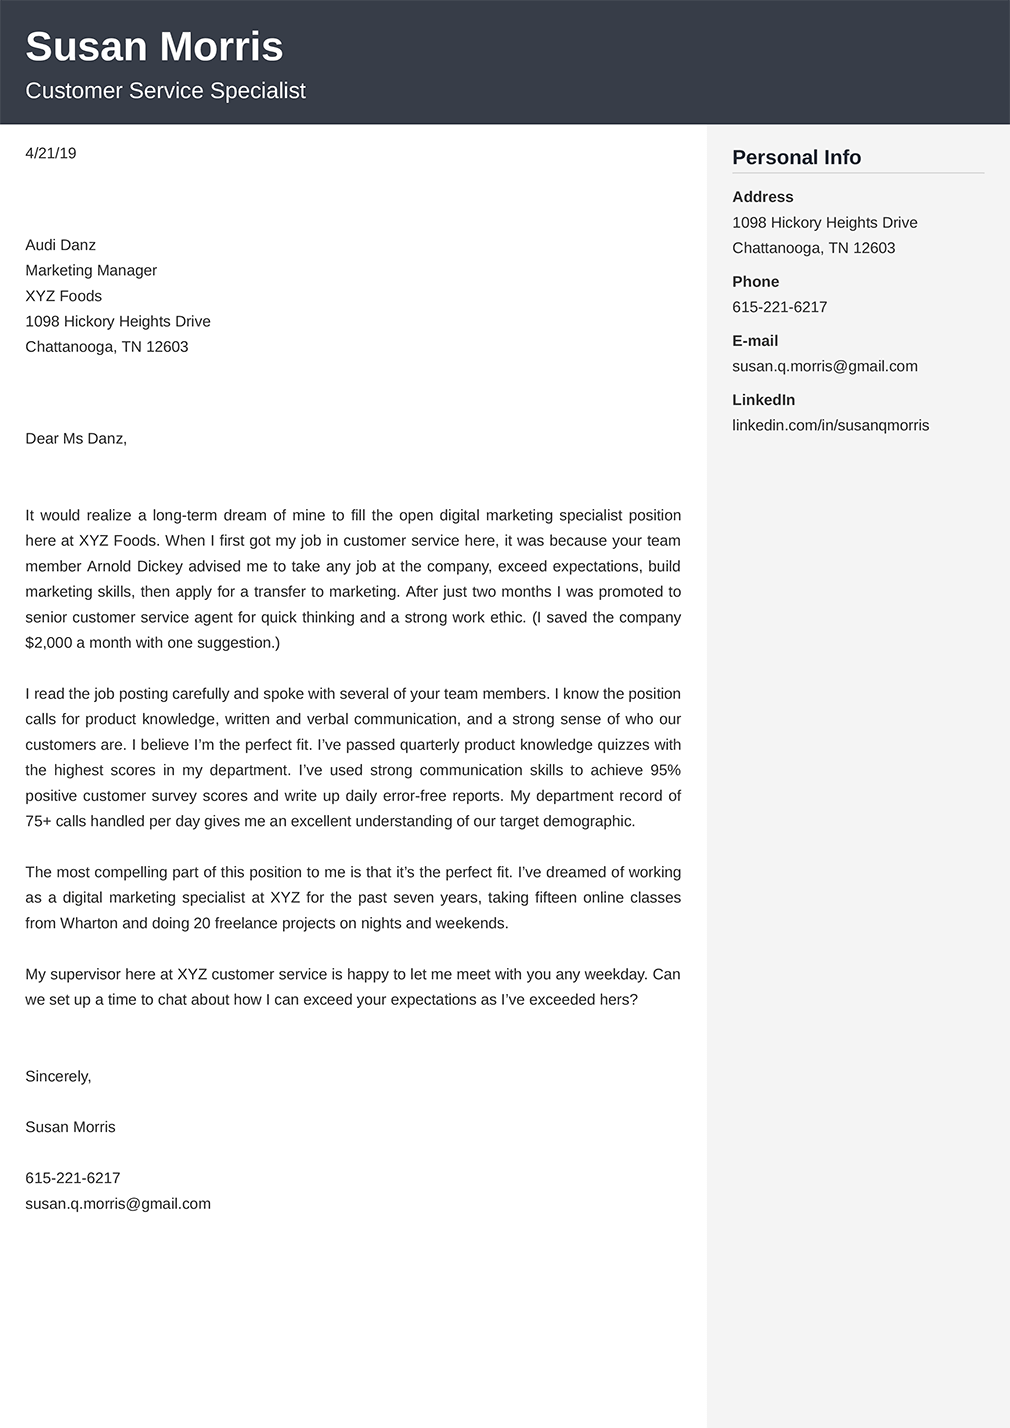 Internal Covering Letter Example from cdn-images.zety.com